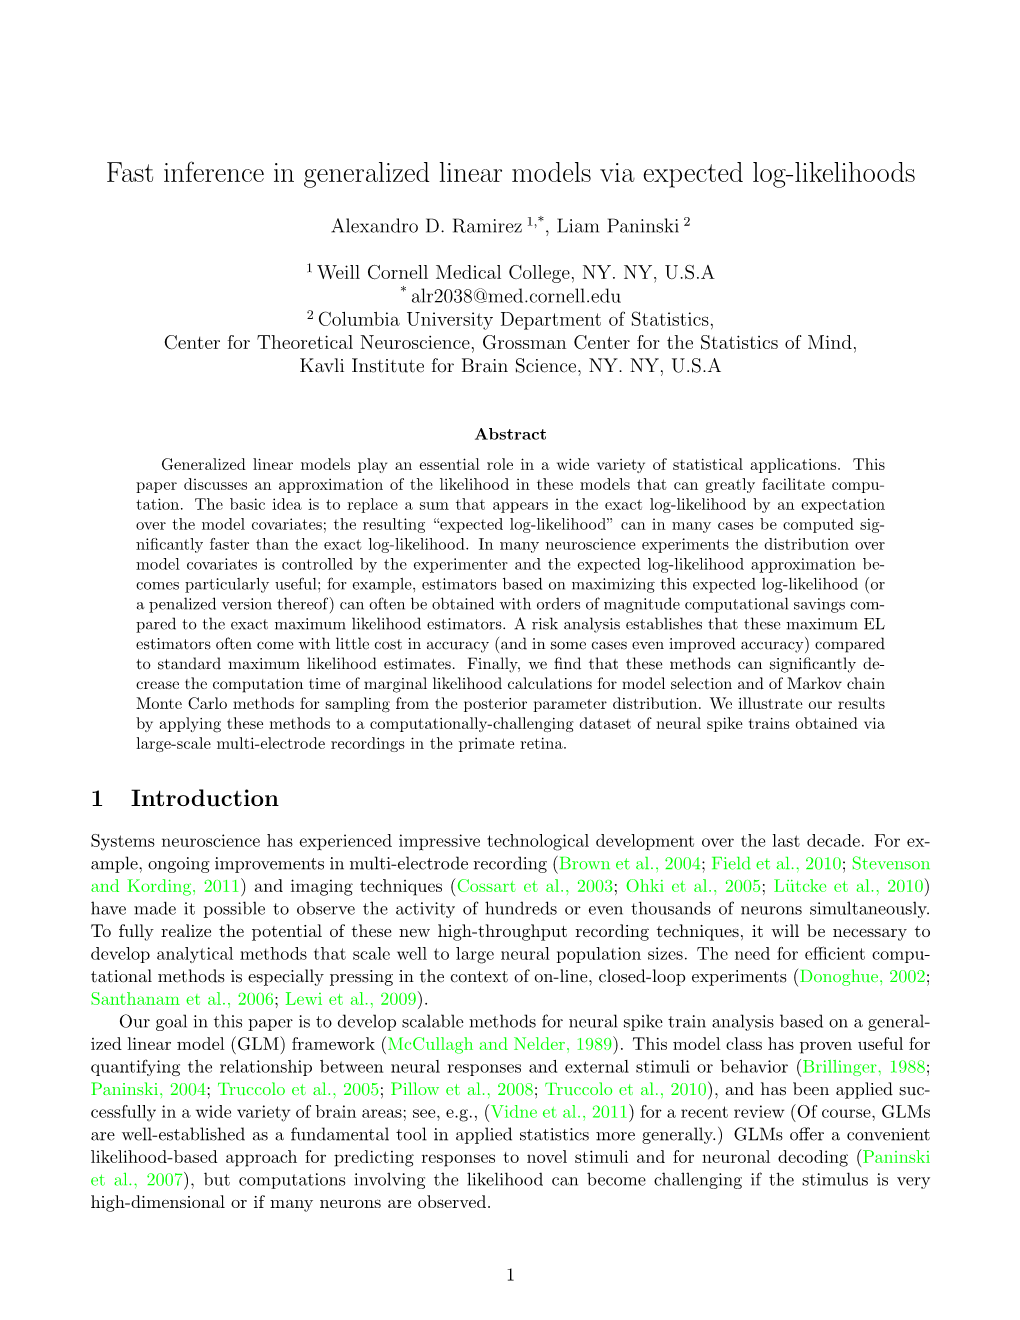 Fast Inference in Generalized Linear Models Via Expected Log-Likelihoods